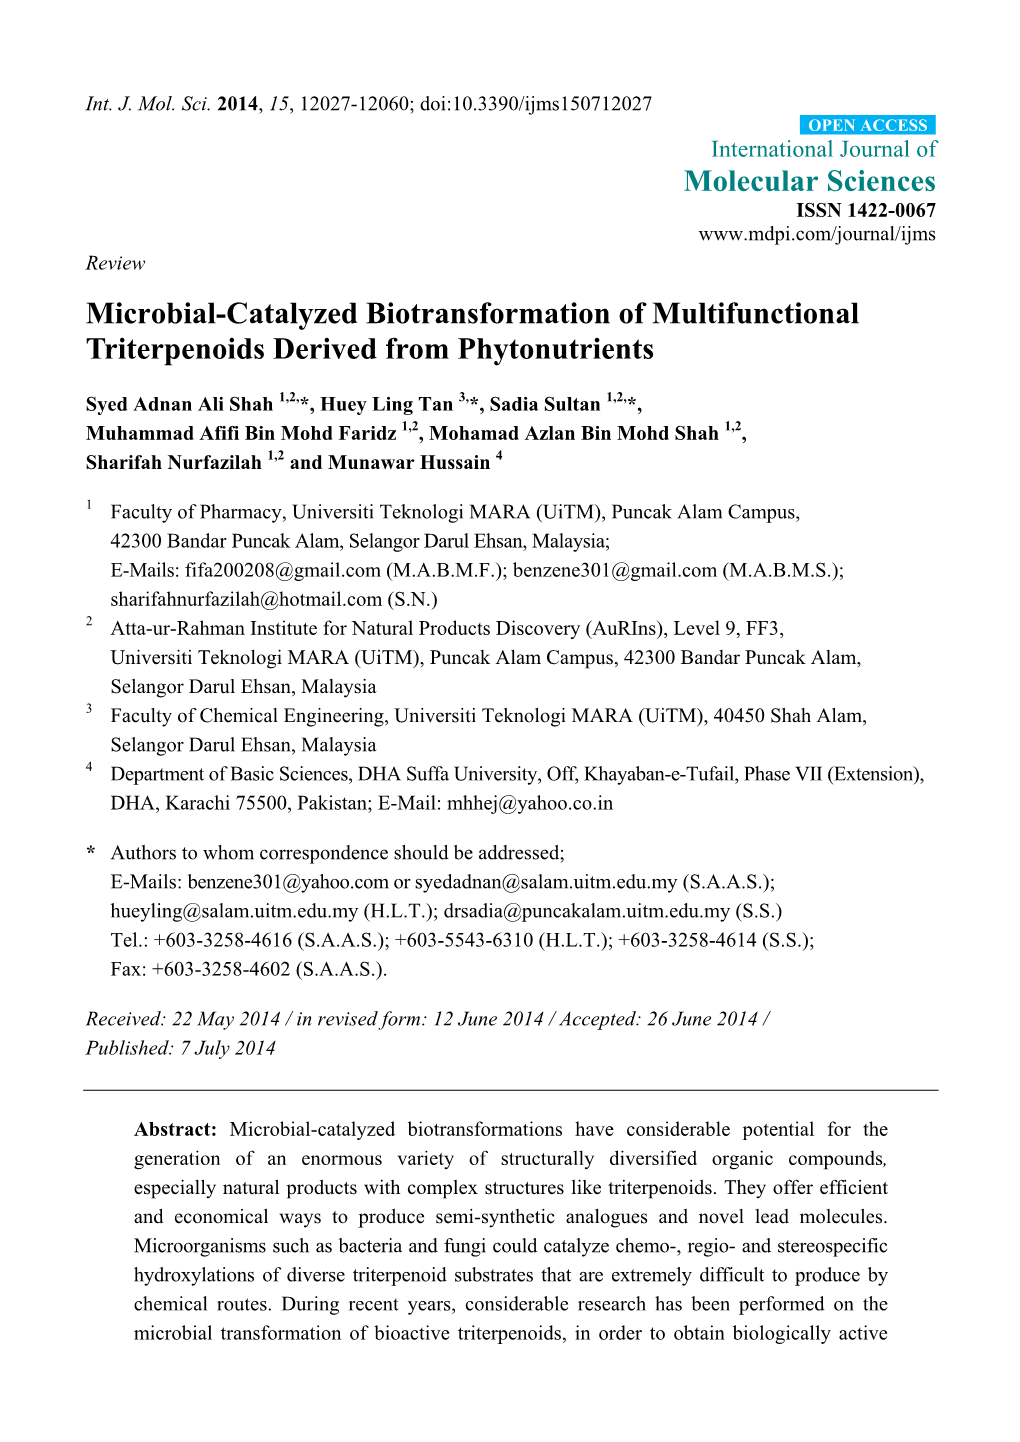 Microbial-Catalyzed Biotransformation of Multifunctional Triterpenoids Derived from Phytonutrients